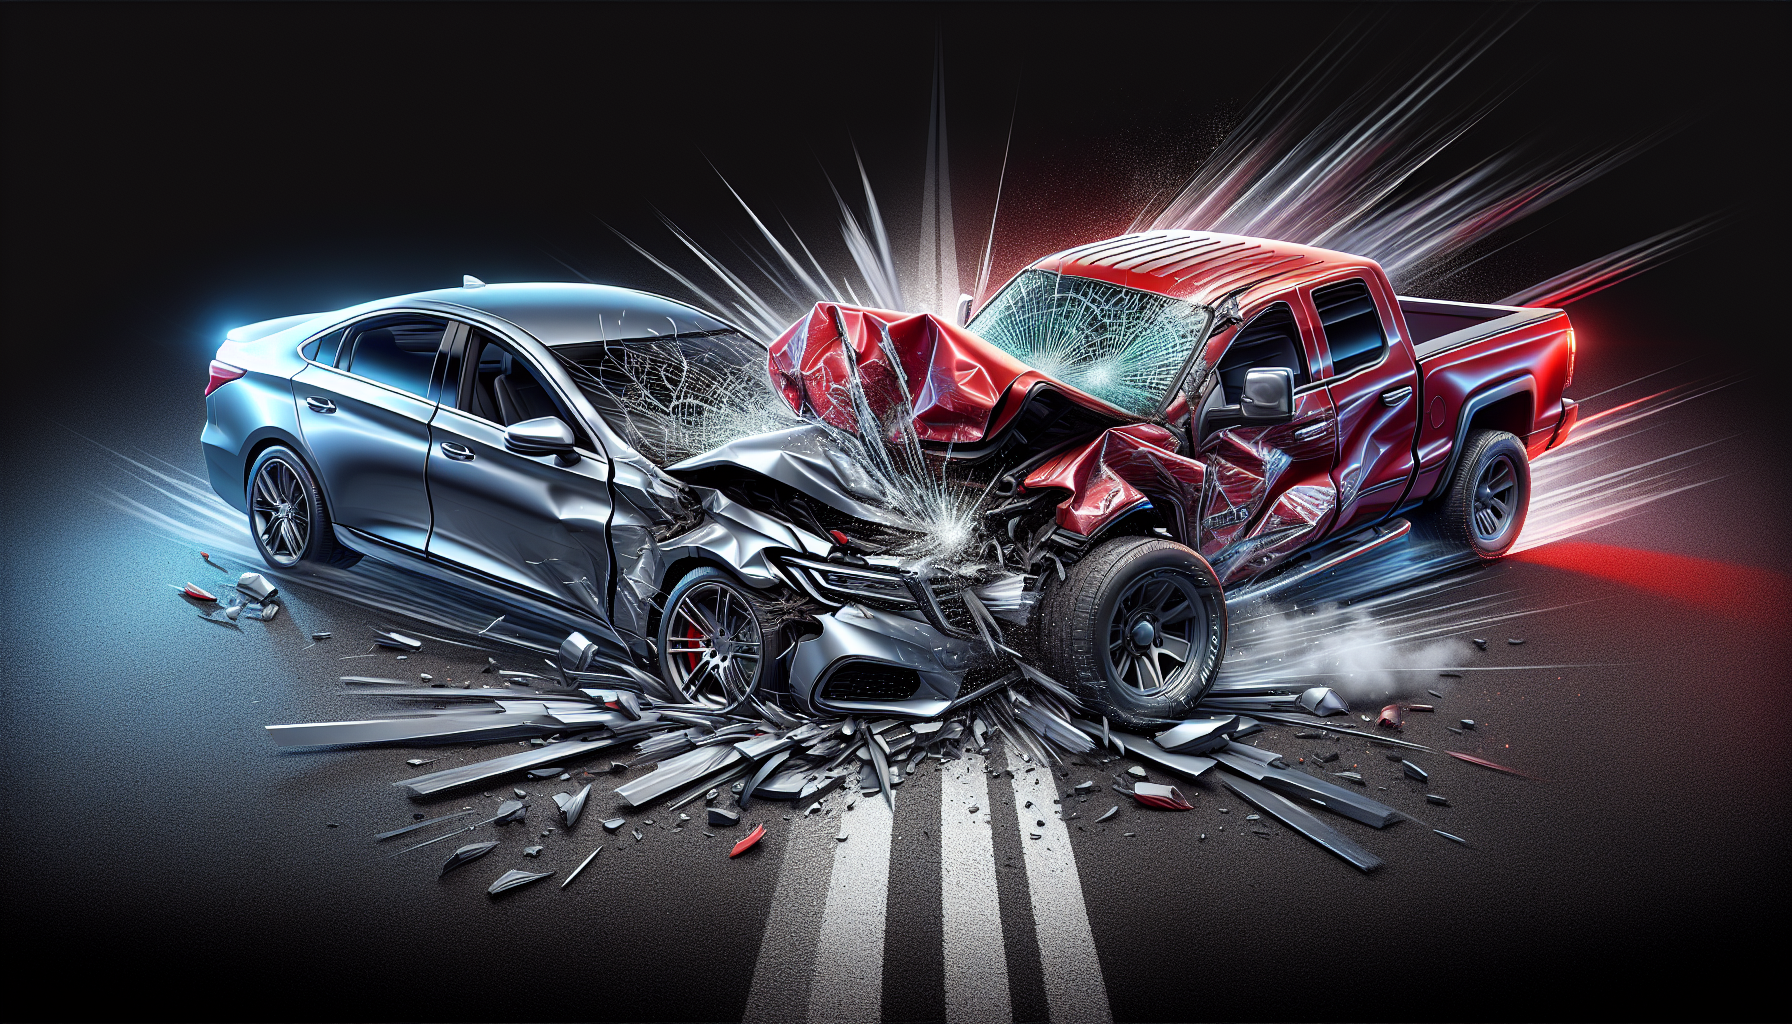 Illustration of a head-on crash. Common types of car accidents.